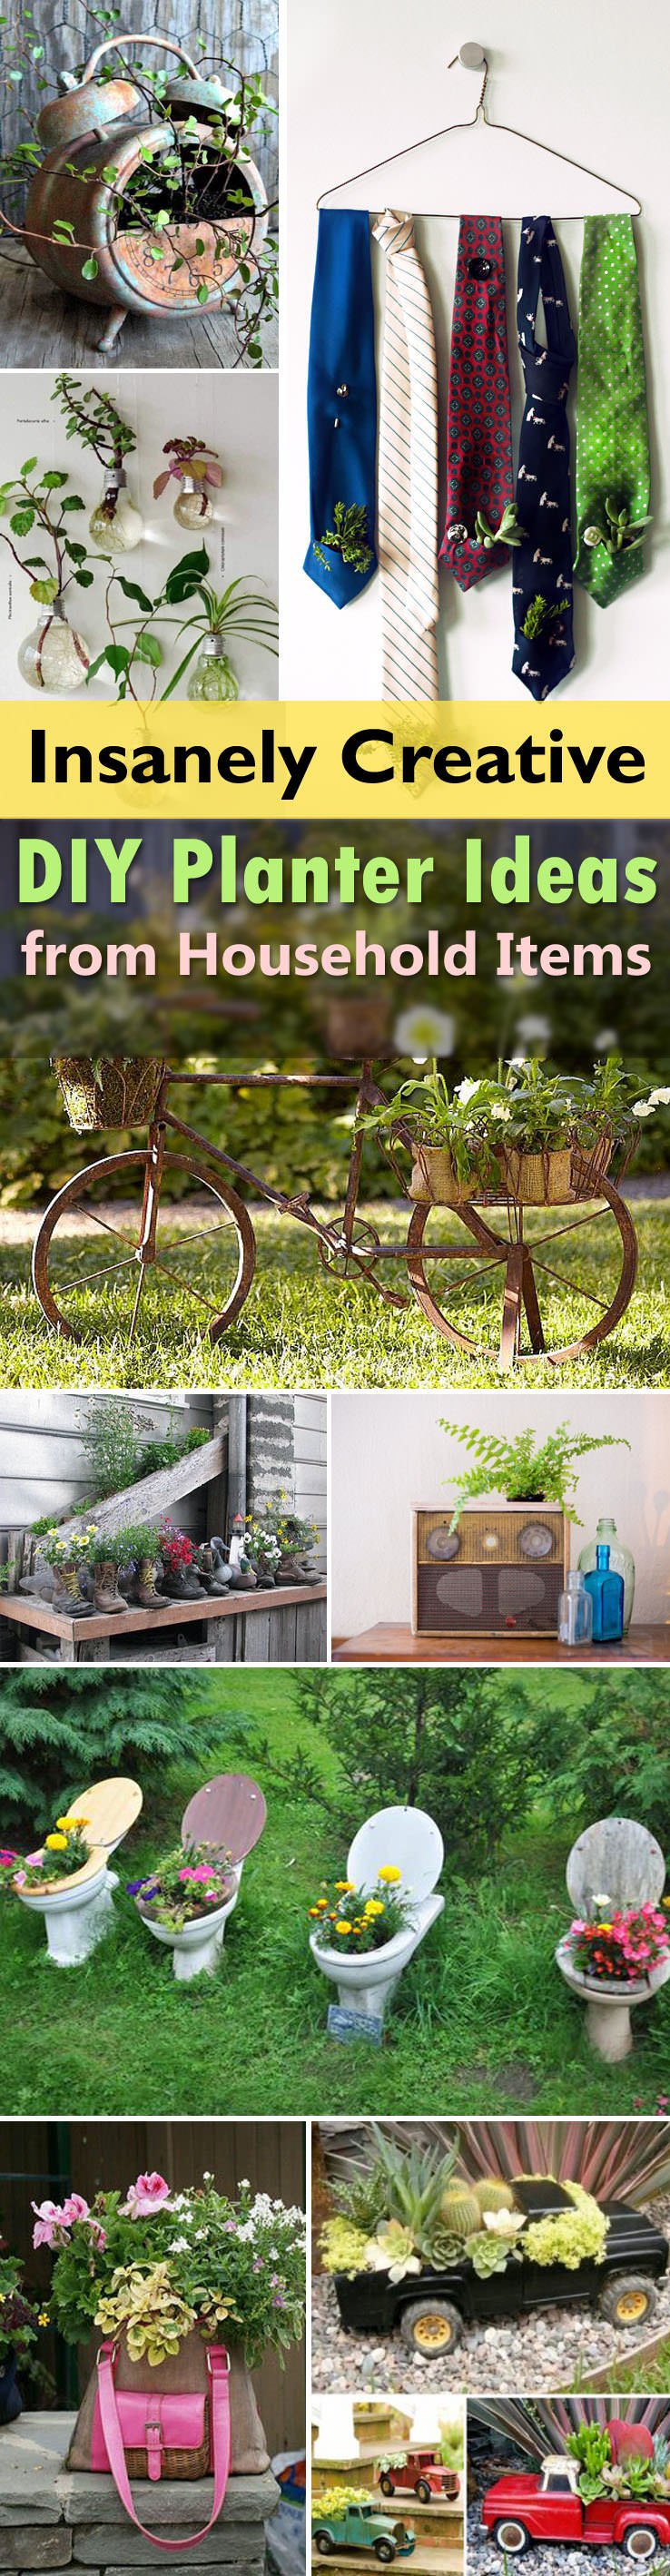 See these 29 insanely creative planter ideas that you can make from household items with their DIY tutorials.